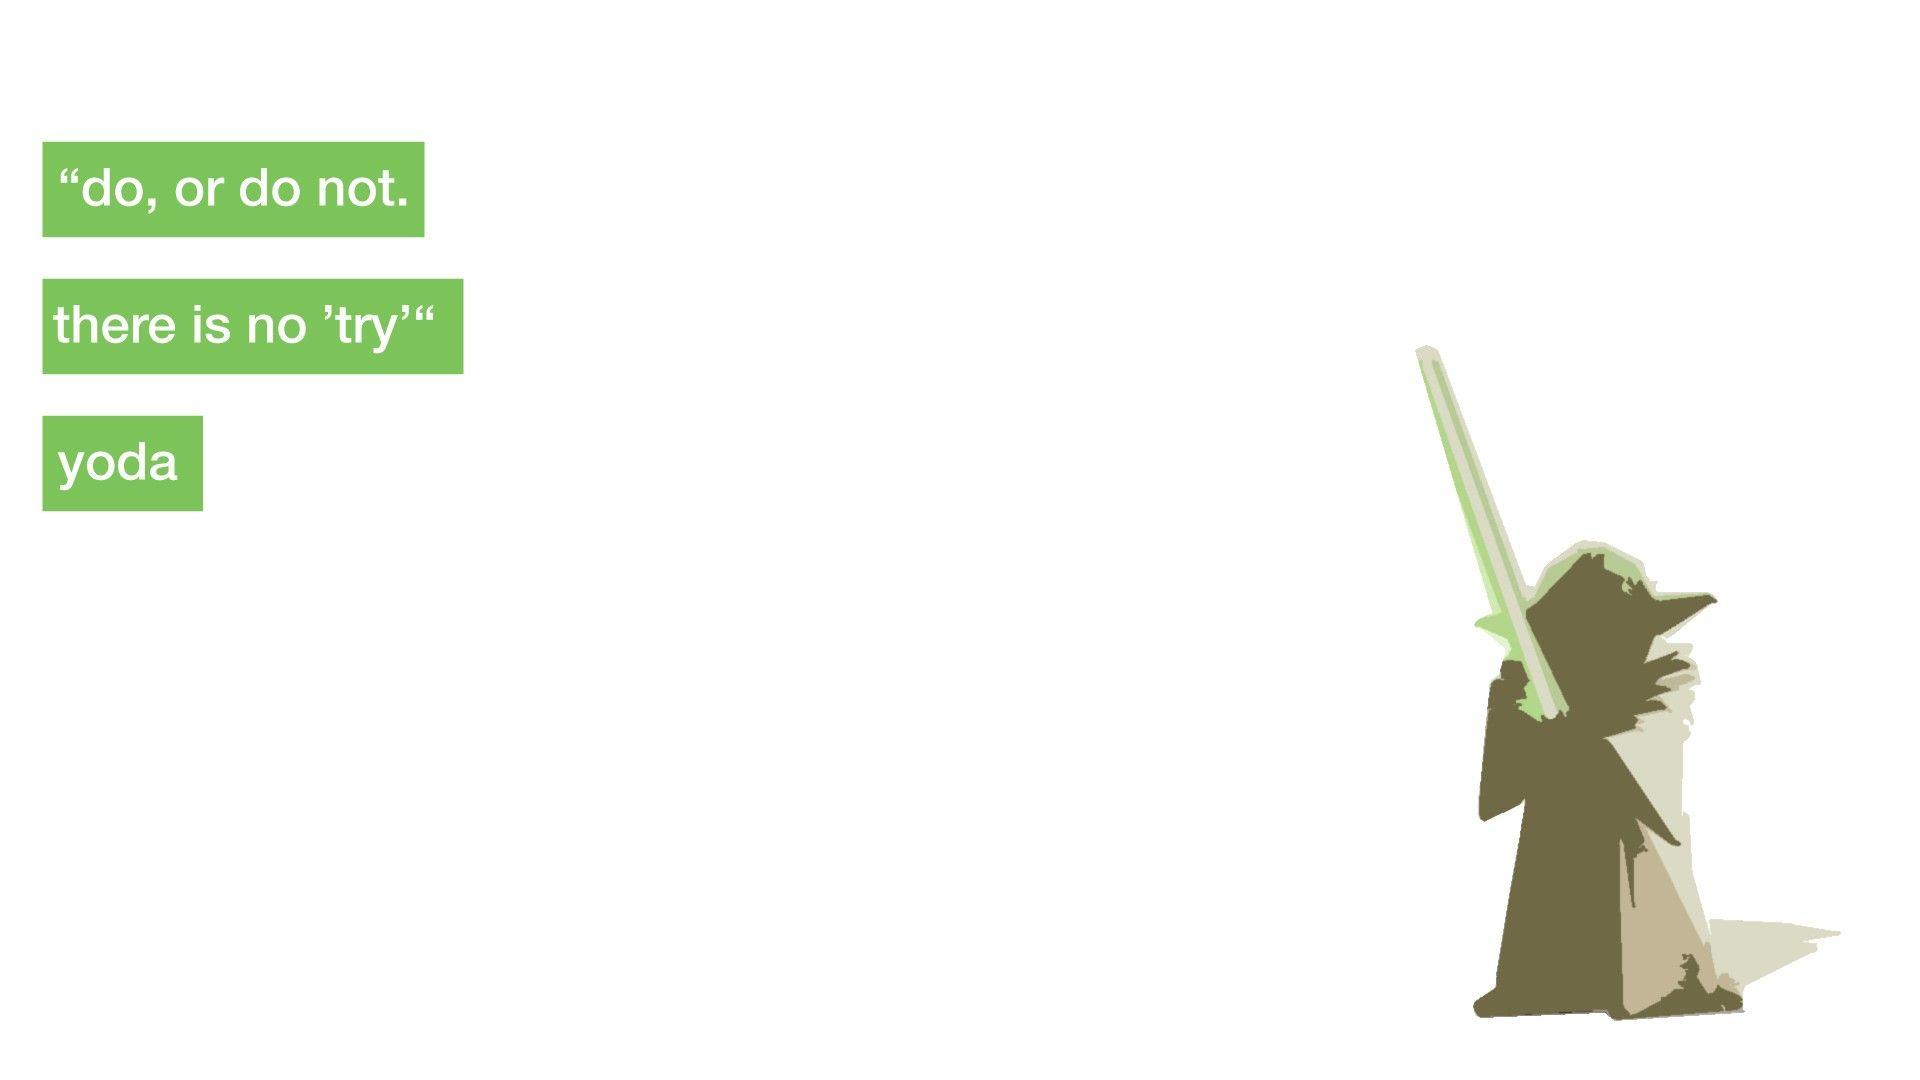 Green Star Wars quotes Jedi typography Yoda George Lucas